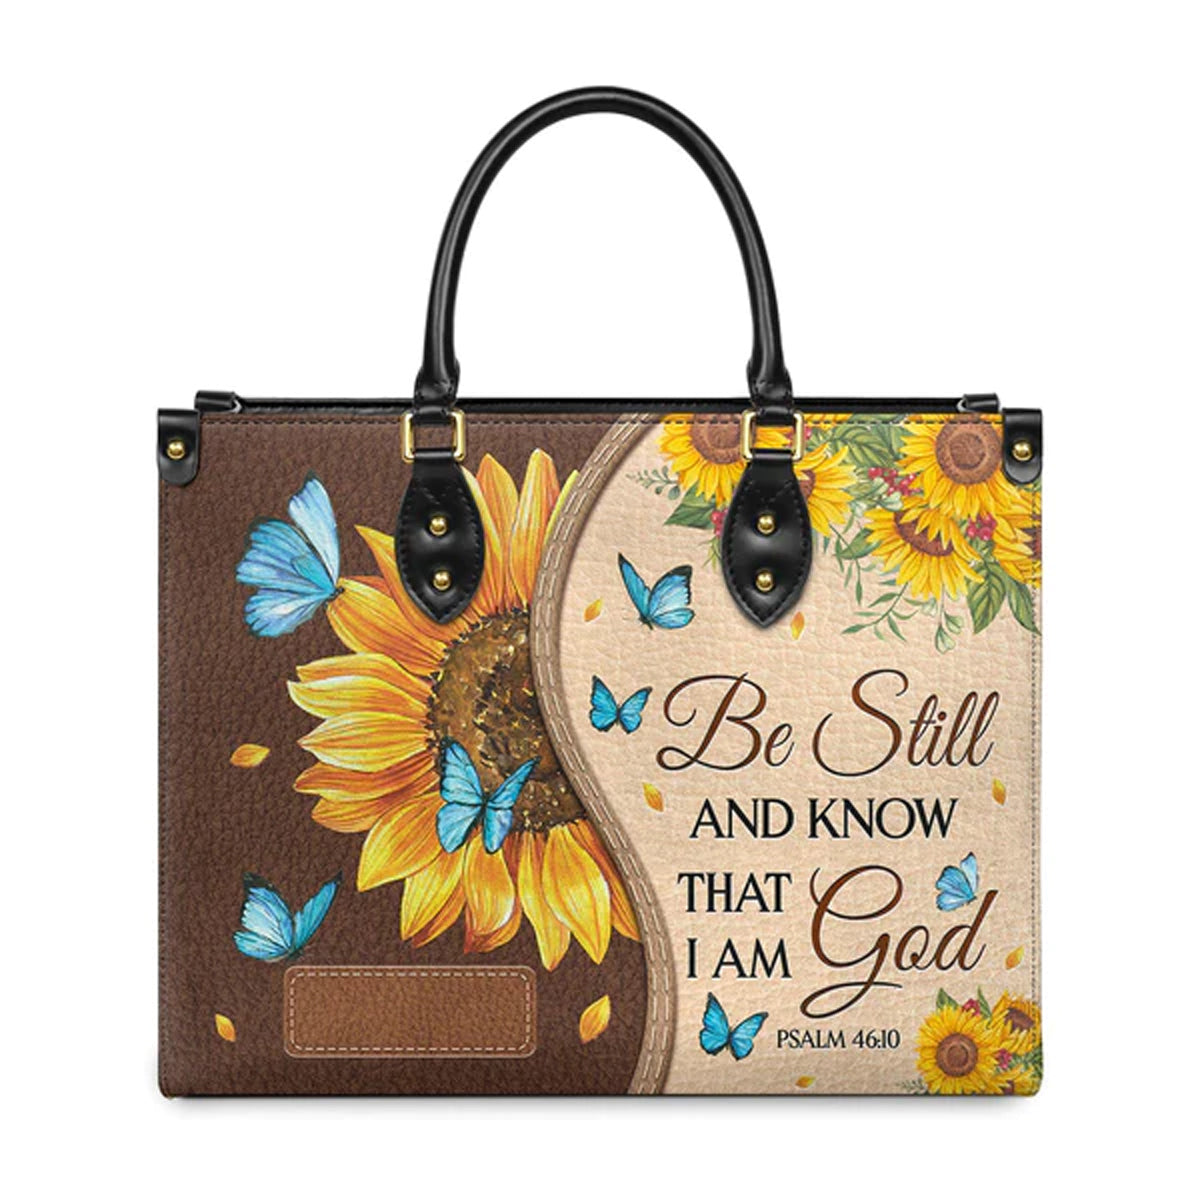 Christianart Designer Handbags, Be Still and Know That I Am God Psalm 46:10 Sunflower Butterfly, Personalized Gifts, Gifts for Women, Christmas Gift.